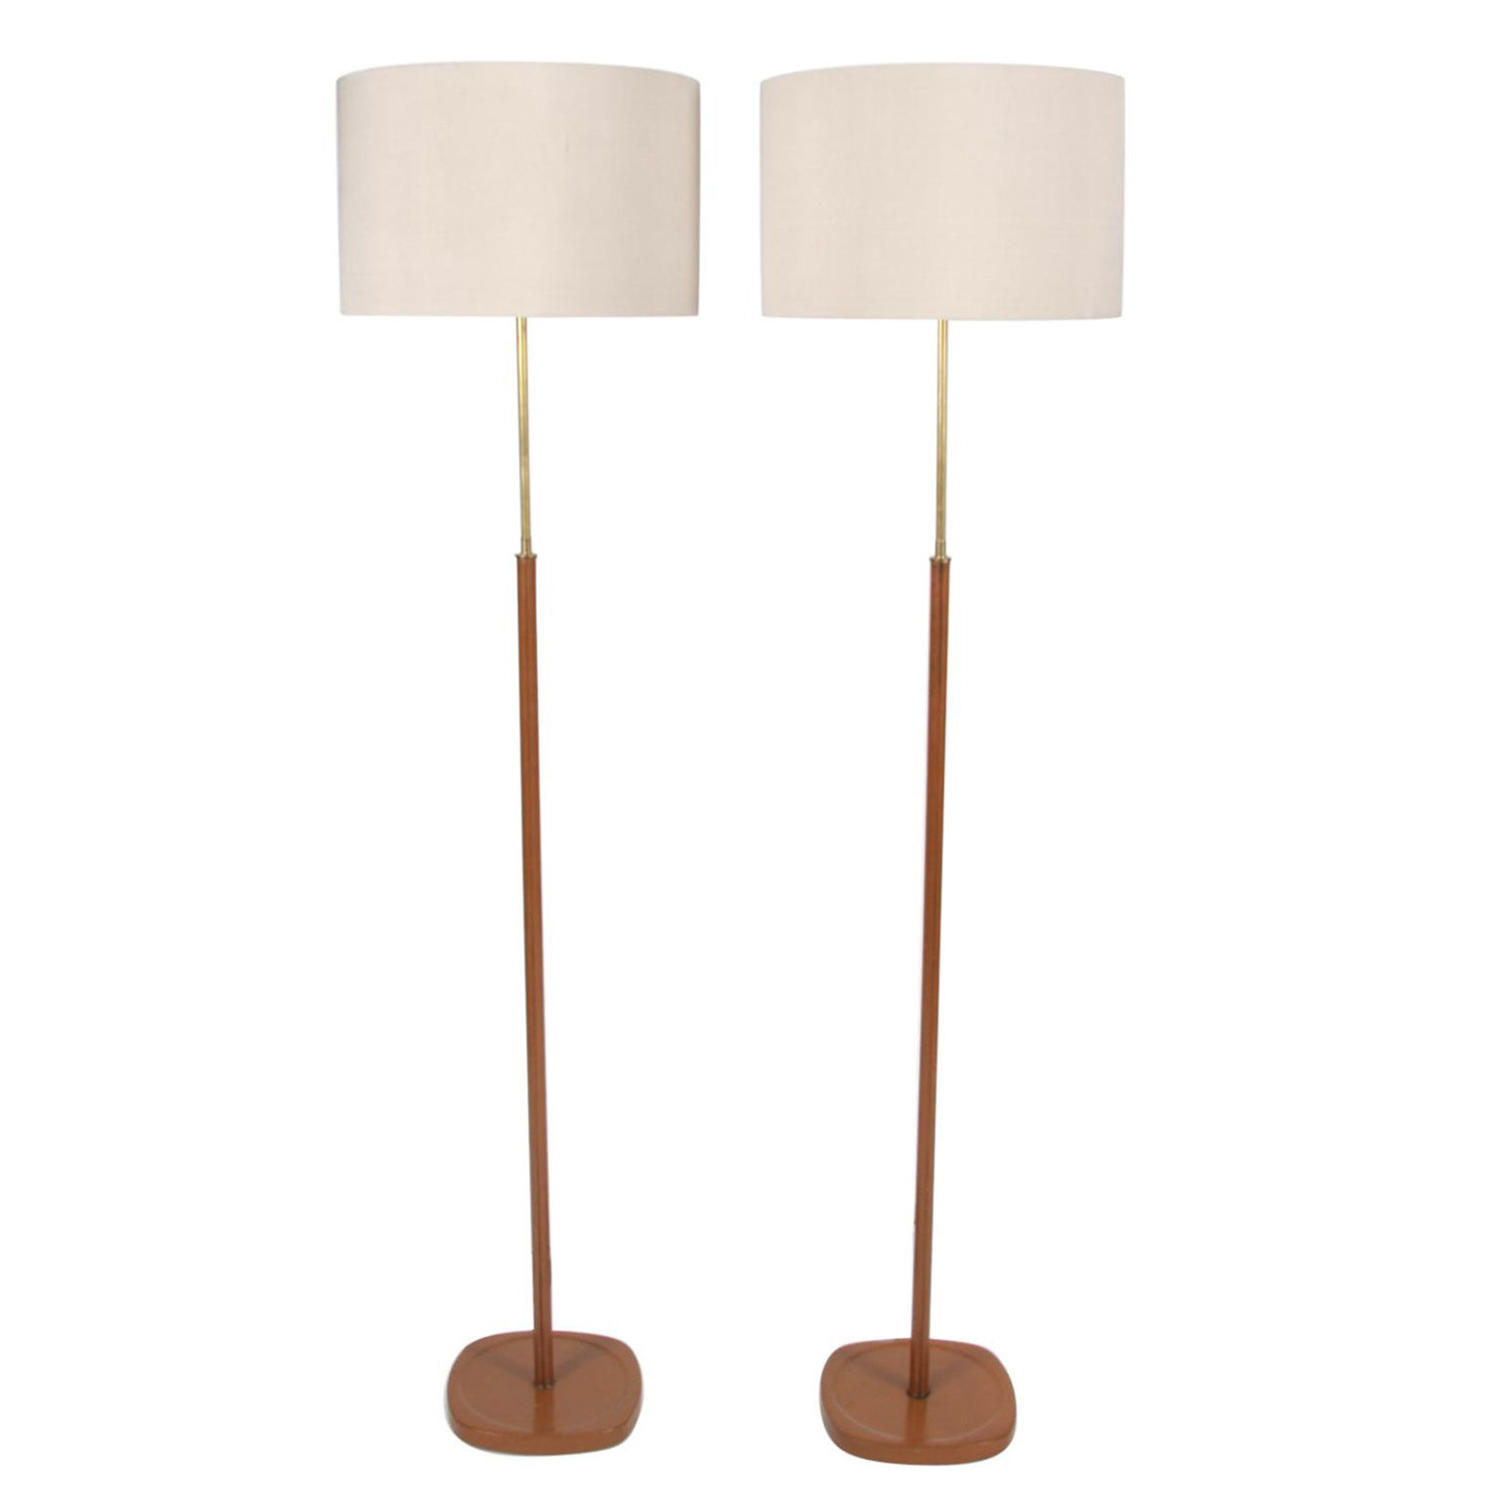 Pair of Tan Leather Floor Lamps